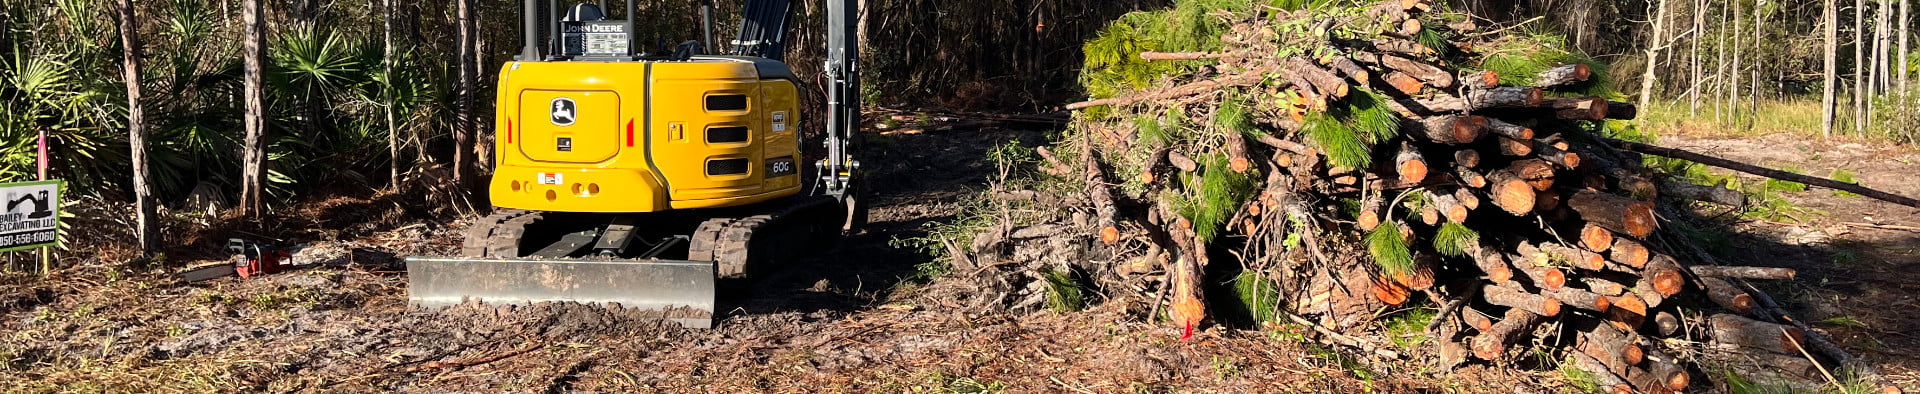 Bailey Excavating Land Clearing Job